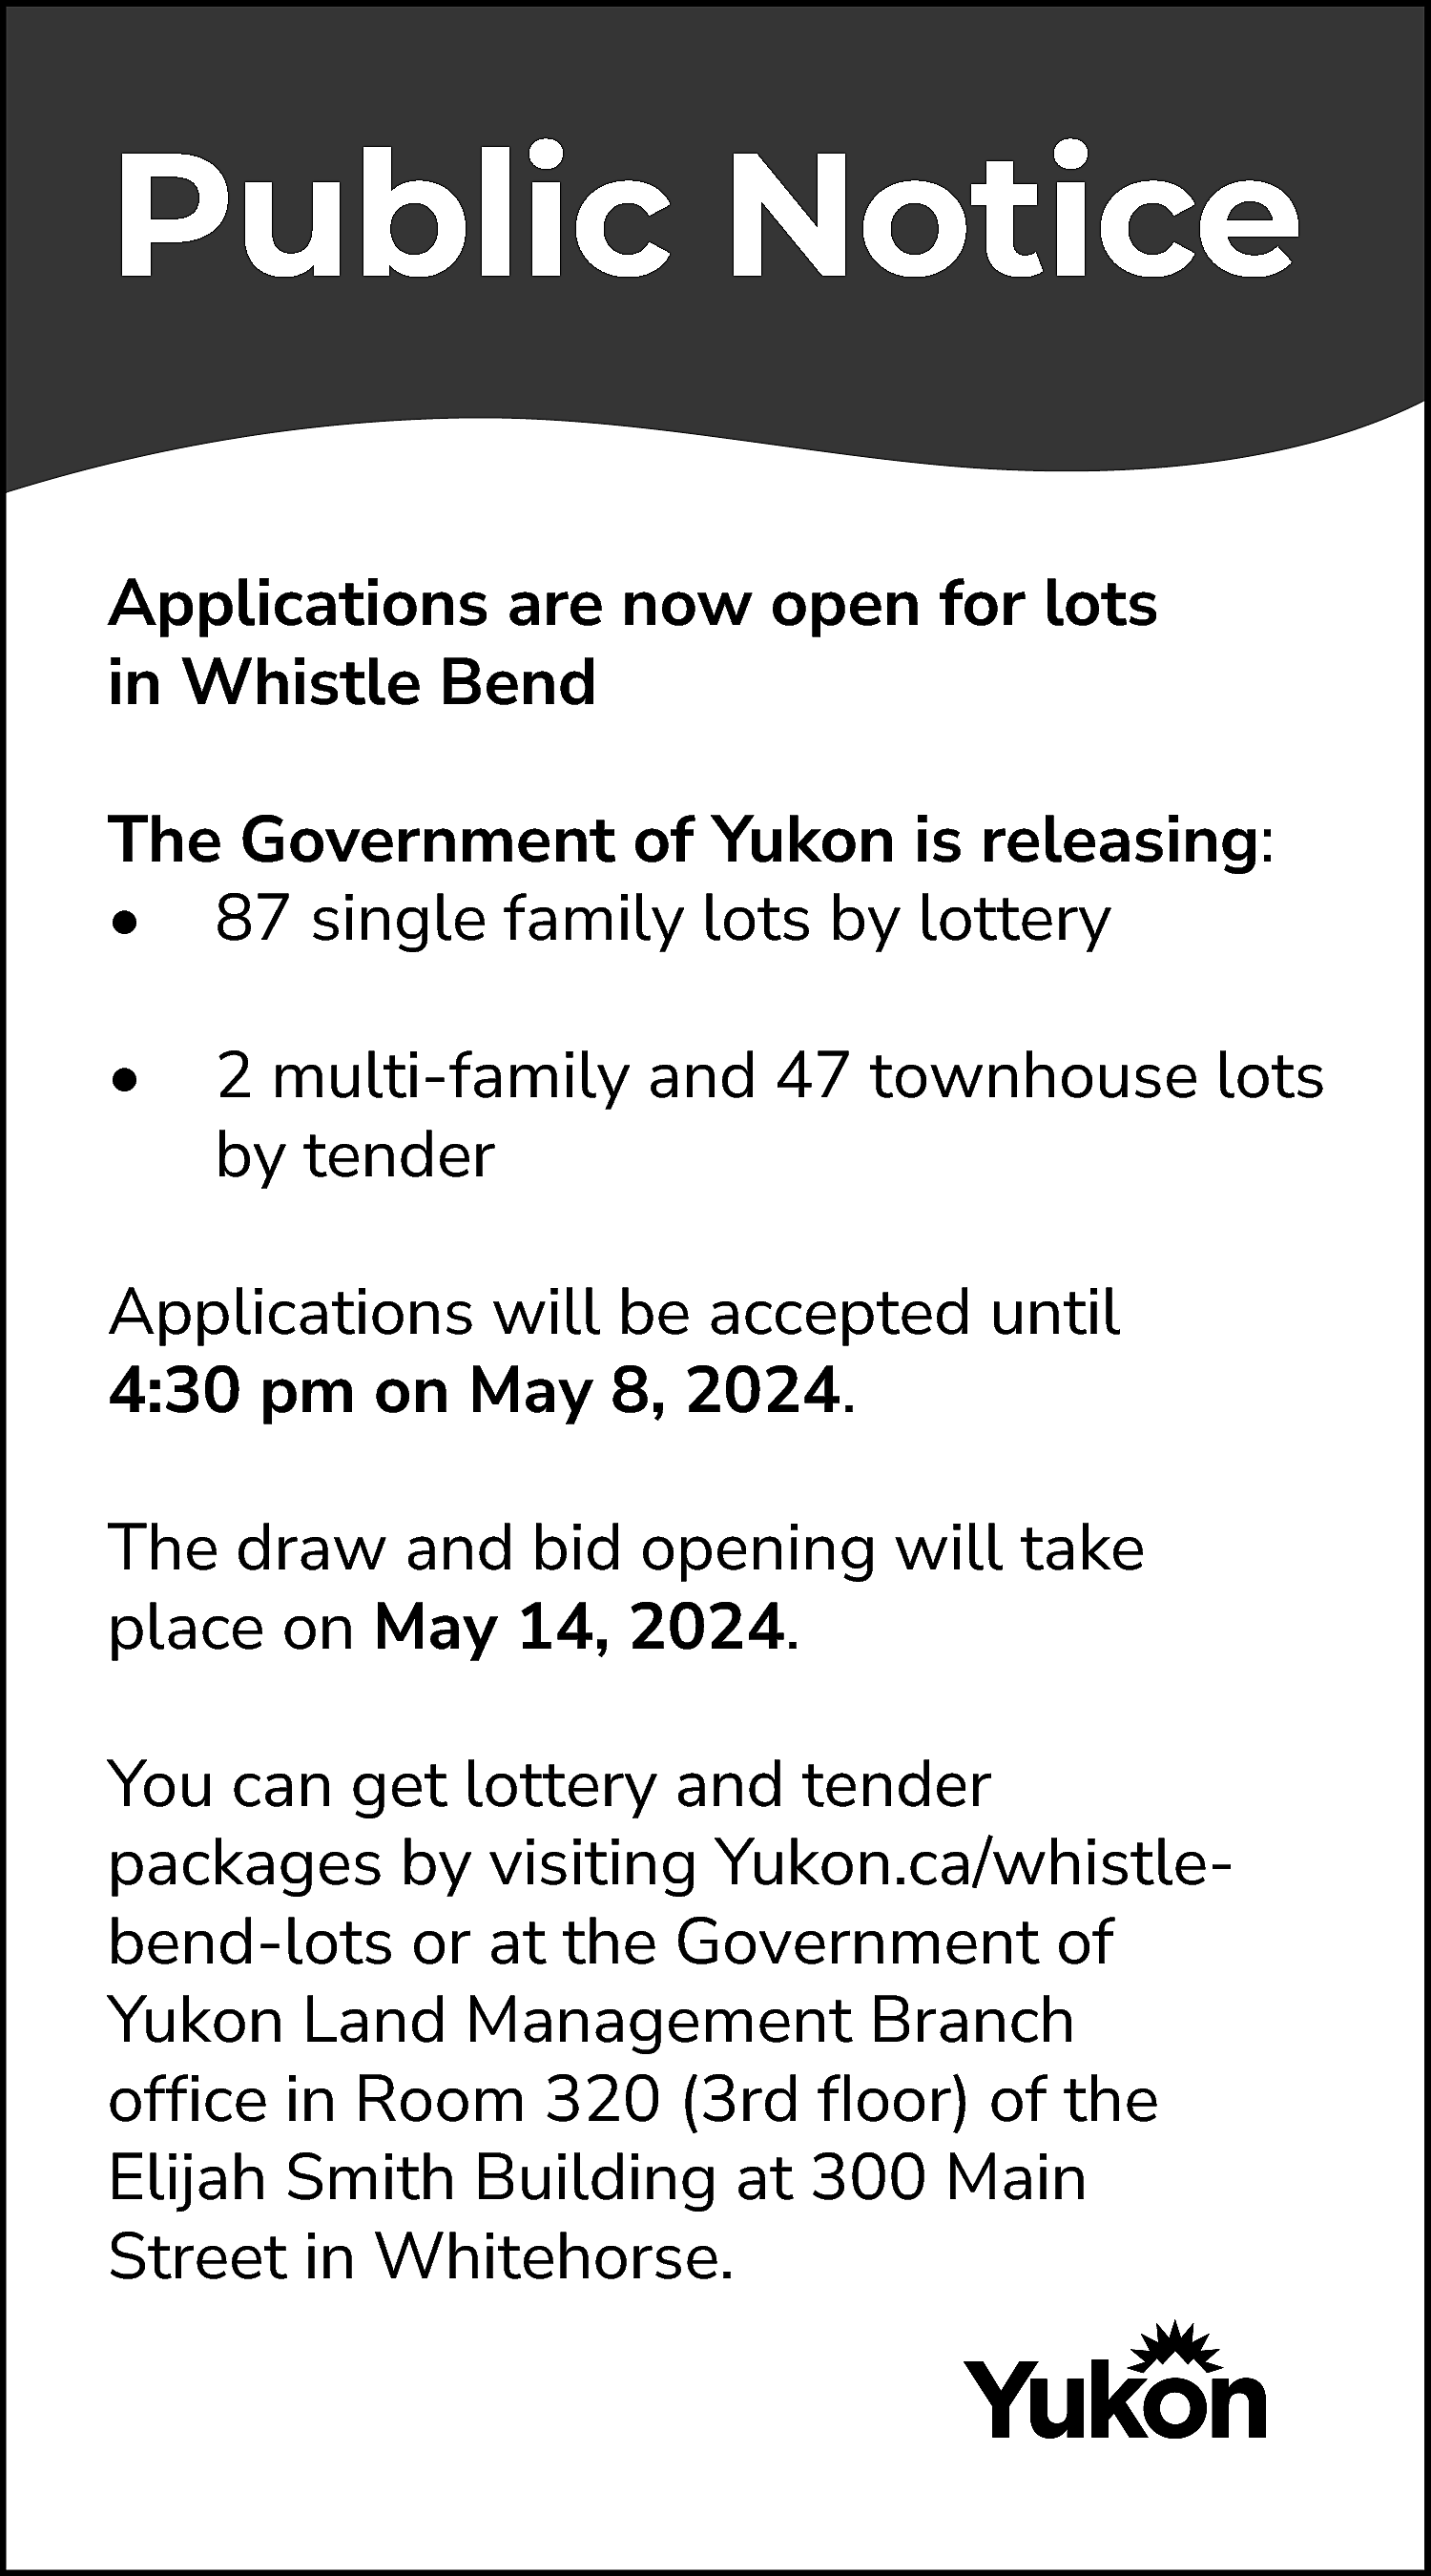 Public Notice <br>Applications are now  Public Notice  Applications are now open for lots  in Whistle Bend  The Government of Yukon is releasing:  • 87 single family lots by lottery  •    2 multi-family and 47 townhouse lots  by tender    Applications will be accepted until  4:30 pm on May 8, 2024.  The draw and bid opening will take  place on May 14, 2024.  You can get lottery and tender  packages by visiting Yukon.ca/whistlebend-lots or at the Government of  Yukon Land Management Branch  office in Room 320 (3rd floor) of the  Elijah Smith Building at 300 Main  Street in Whitehorse.    